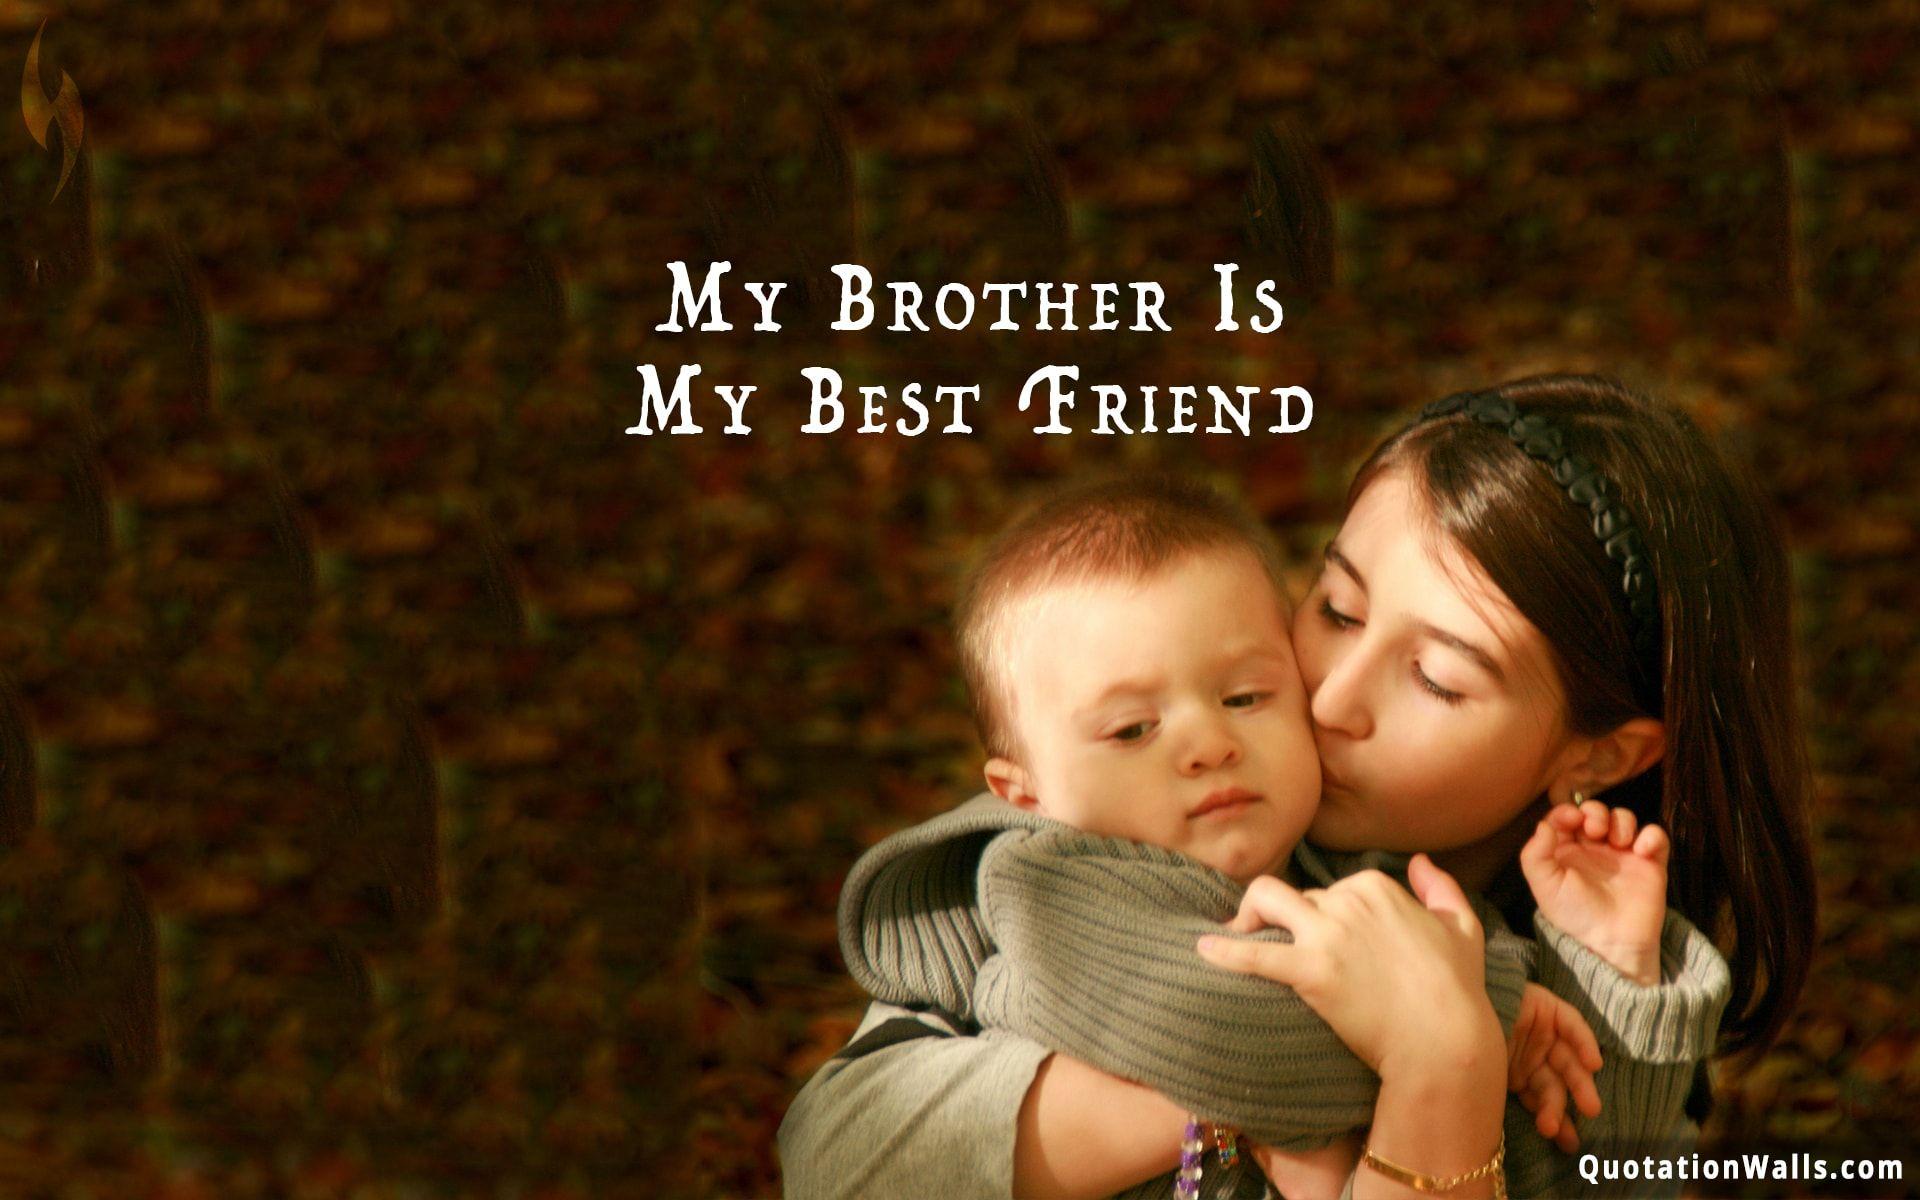 Sister Quotes Wallpaper For Mobile. Image, Picture, Photo Free